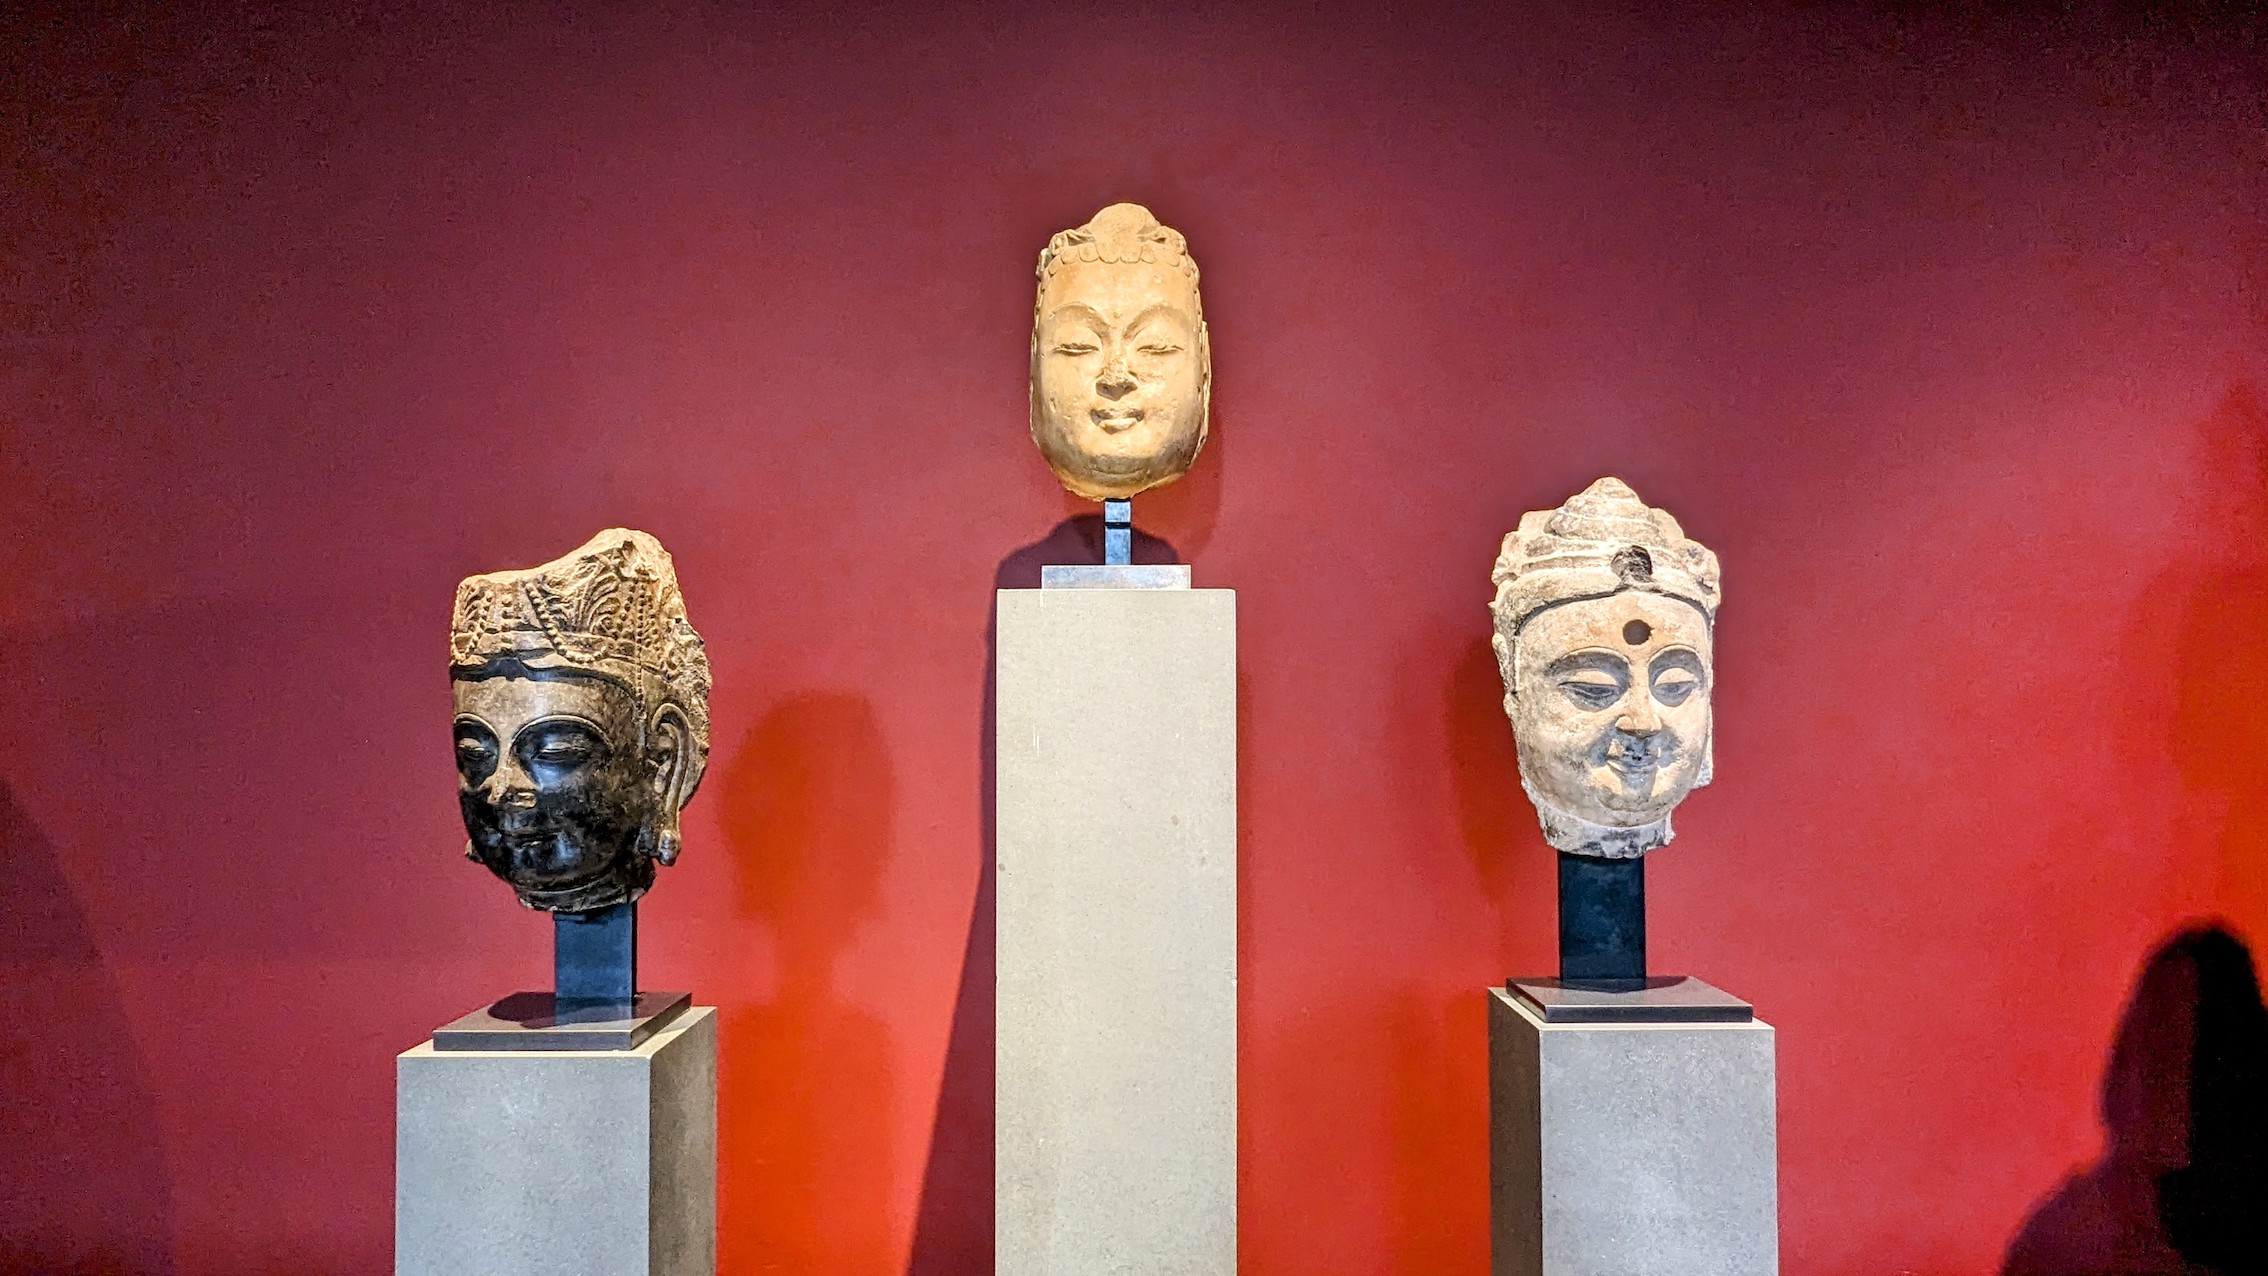 Religious sculptures from East Asia on display at the Musée Cernuschi in Paris.